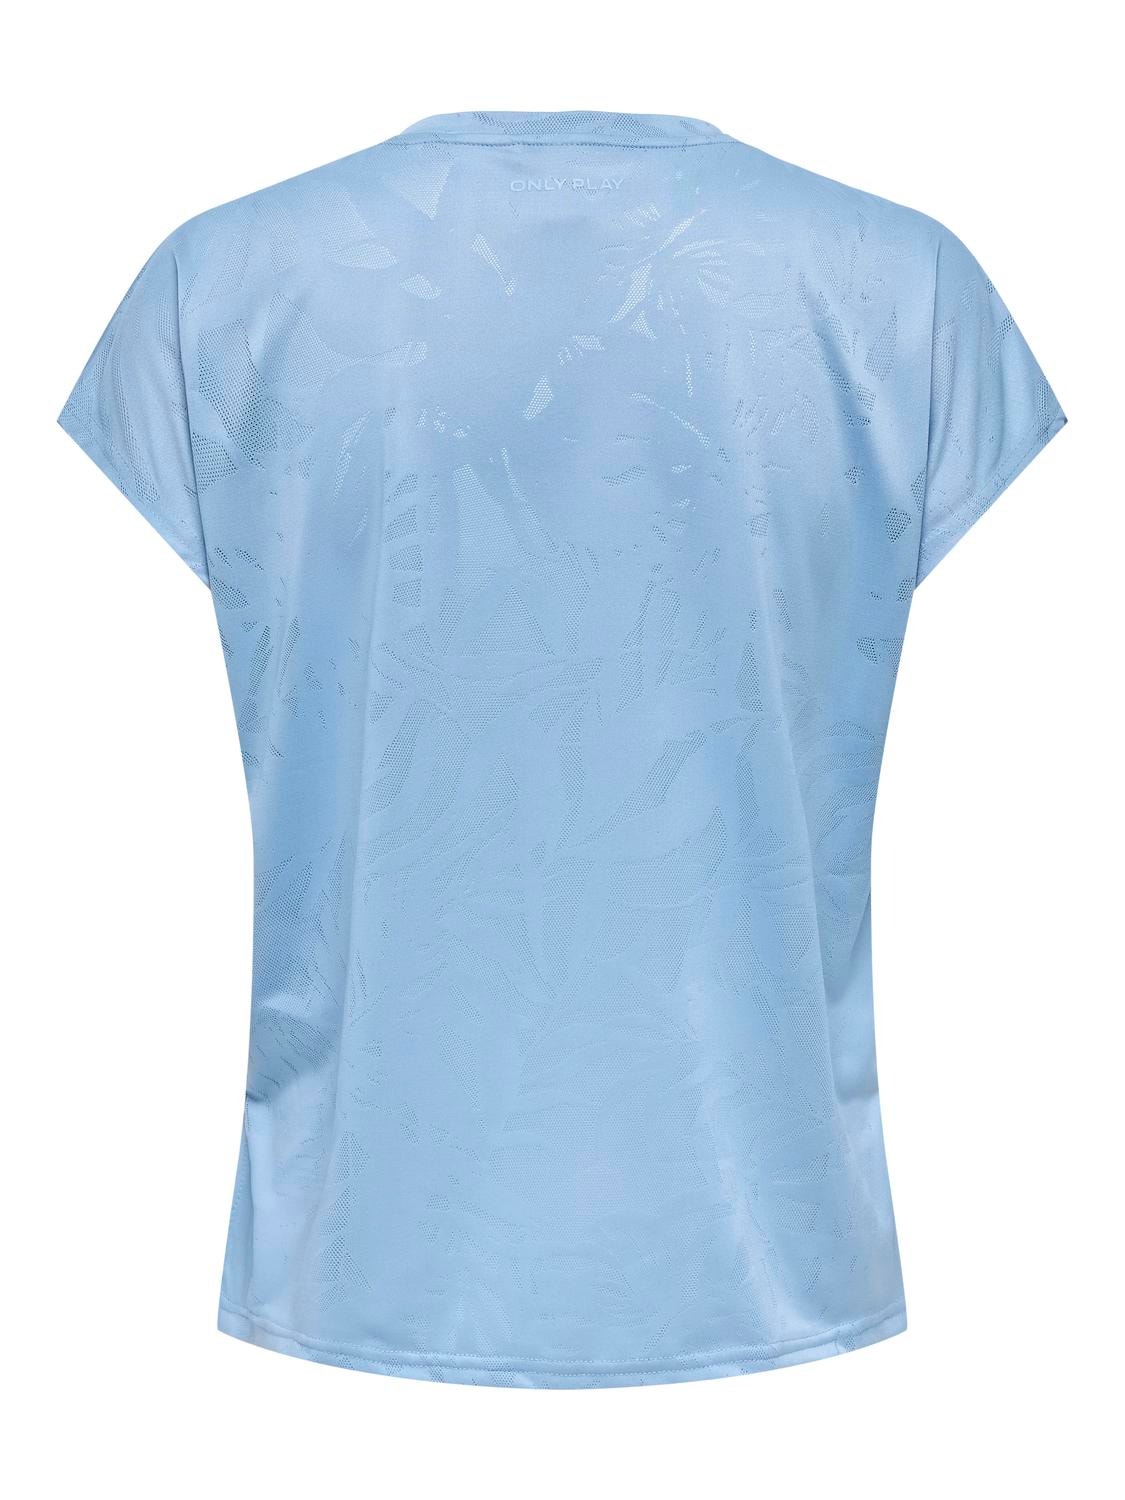 ONLY Batwing t-shirt -Blissful Blue - 15318944